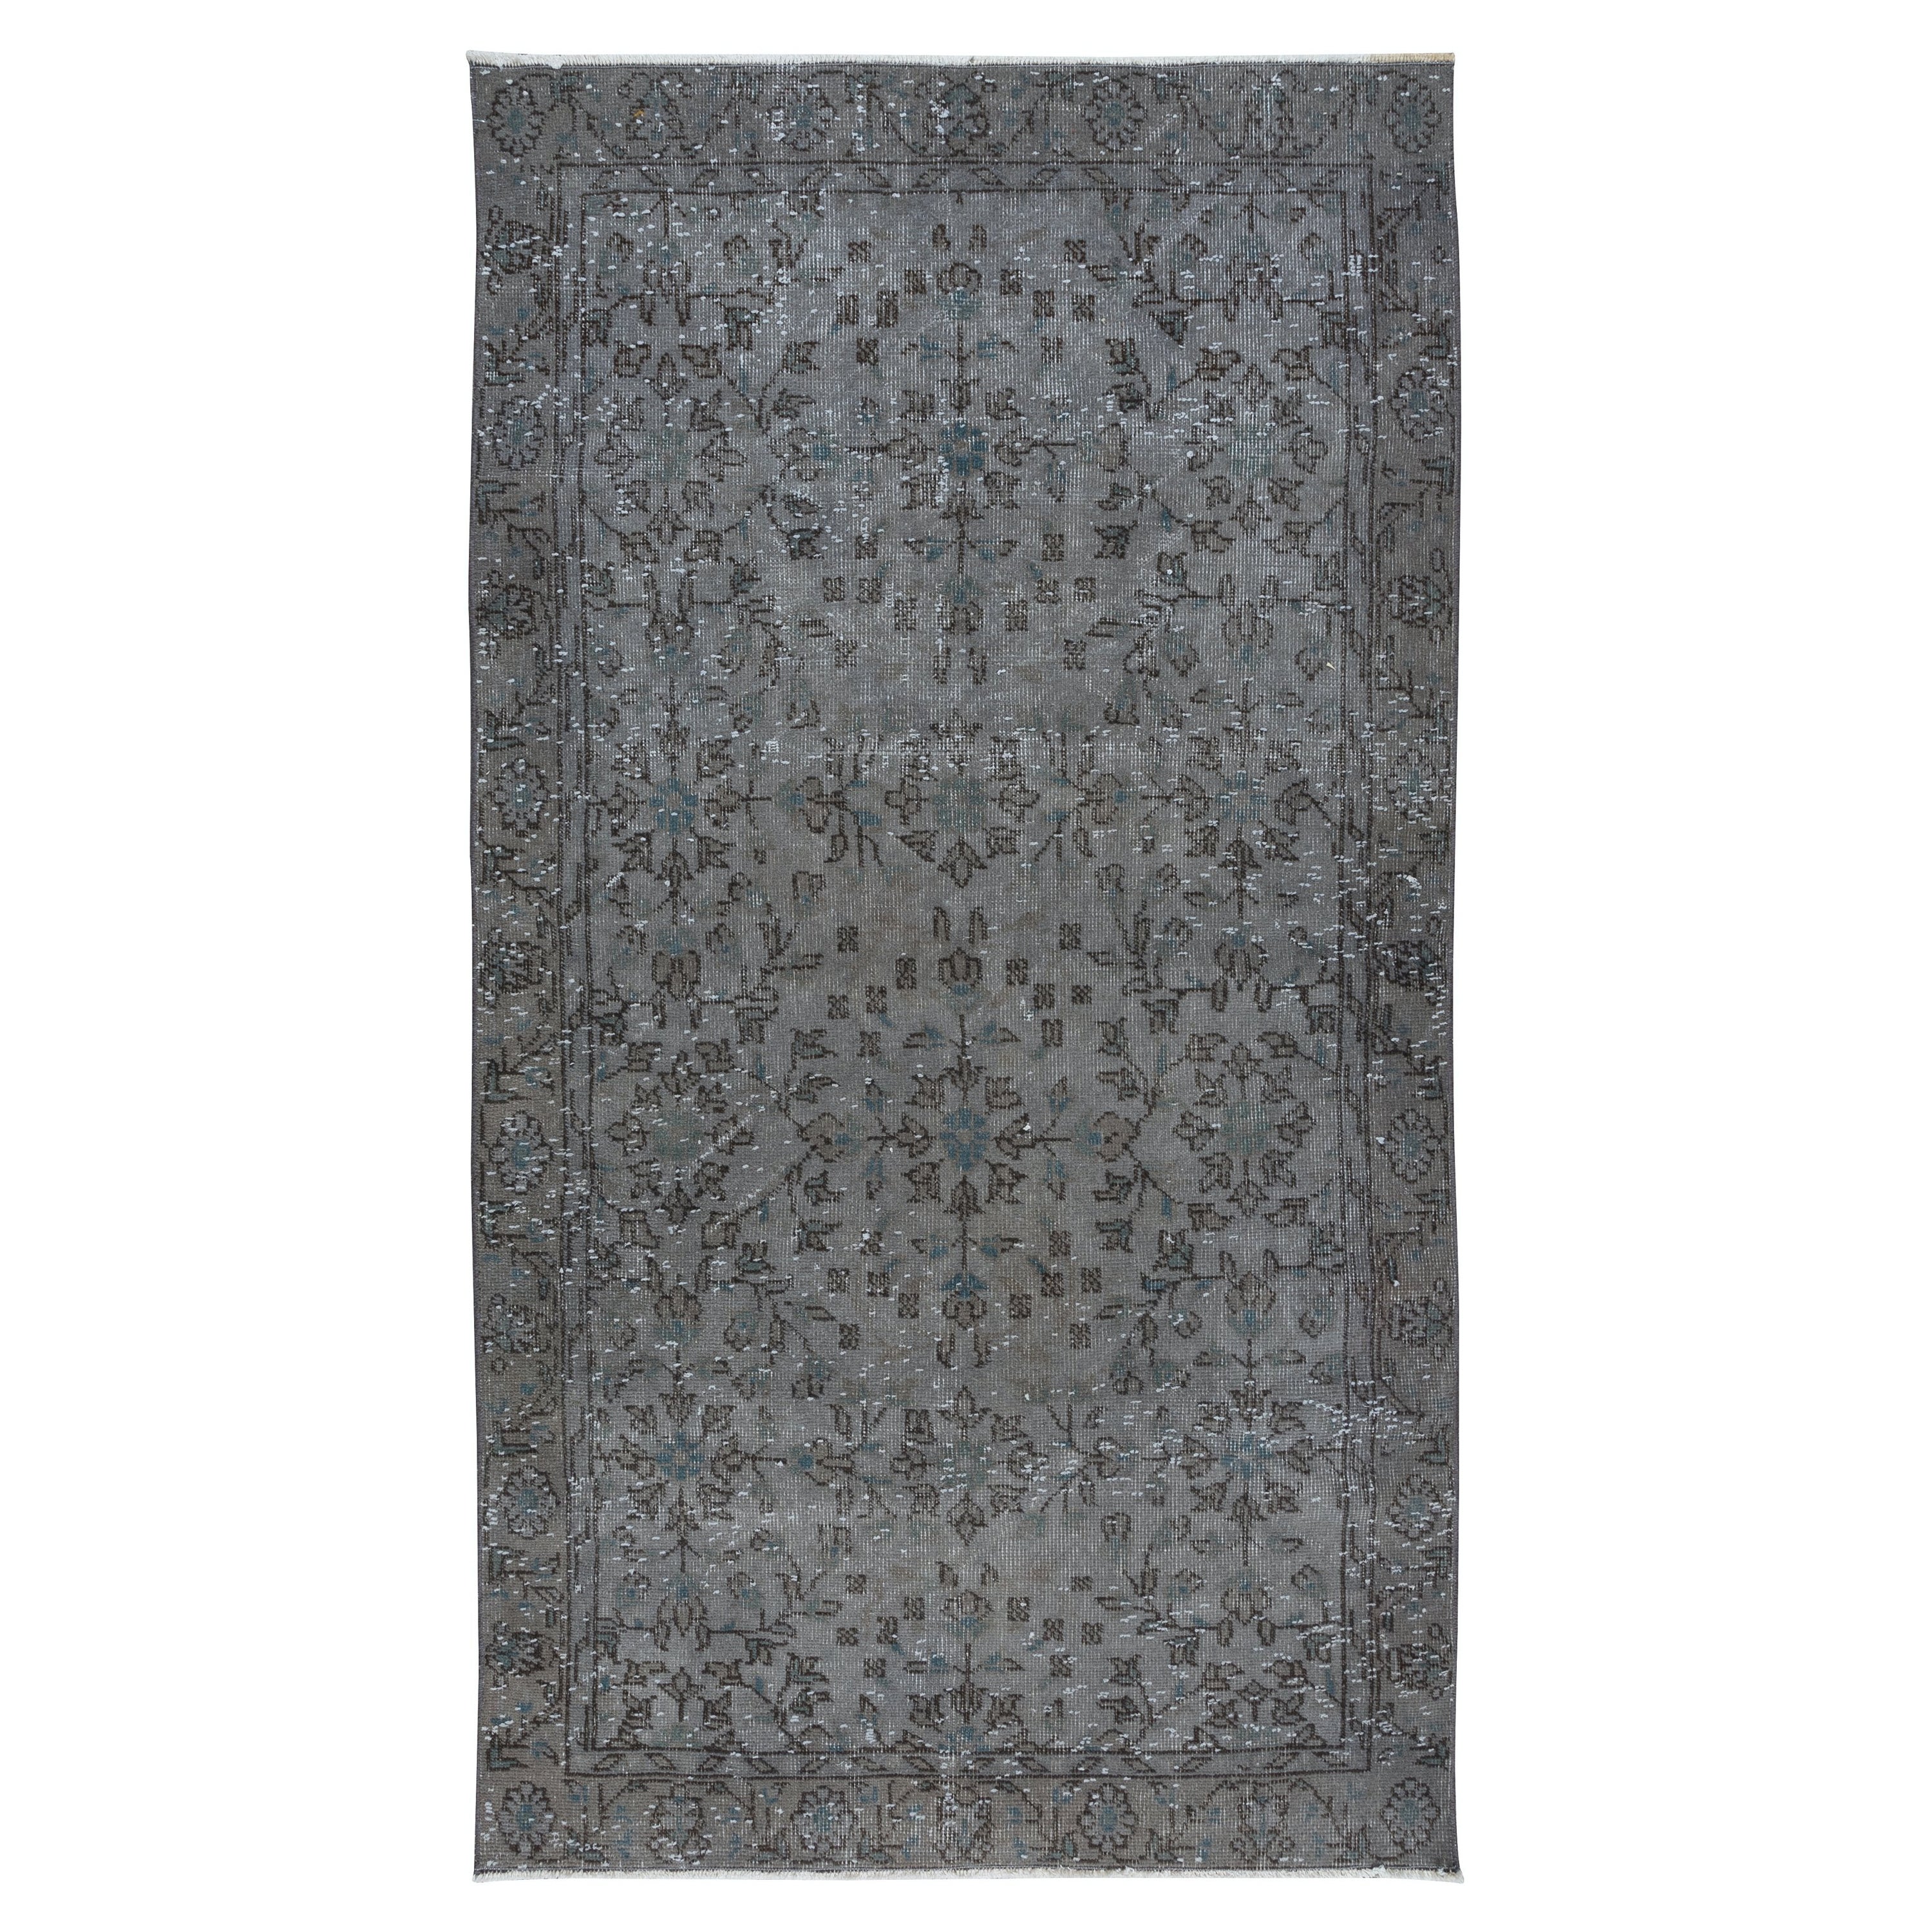 3.5x6.3 Ft Contemporary Turkish Handmade Rug with Teal Blue Details & Grey Field For Sale